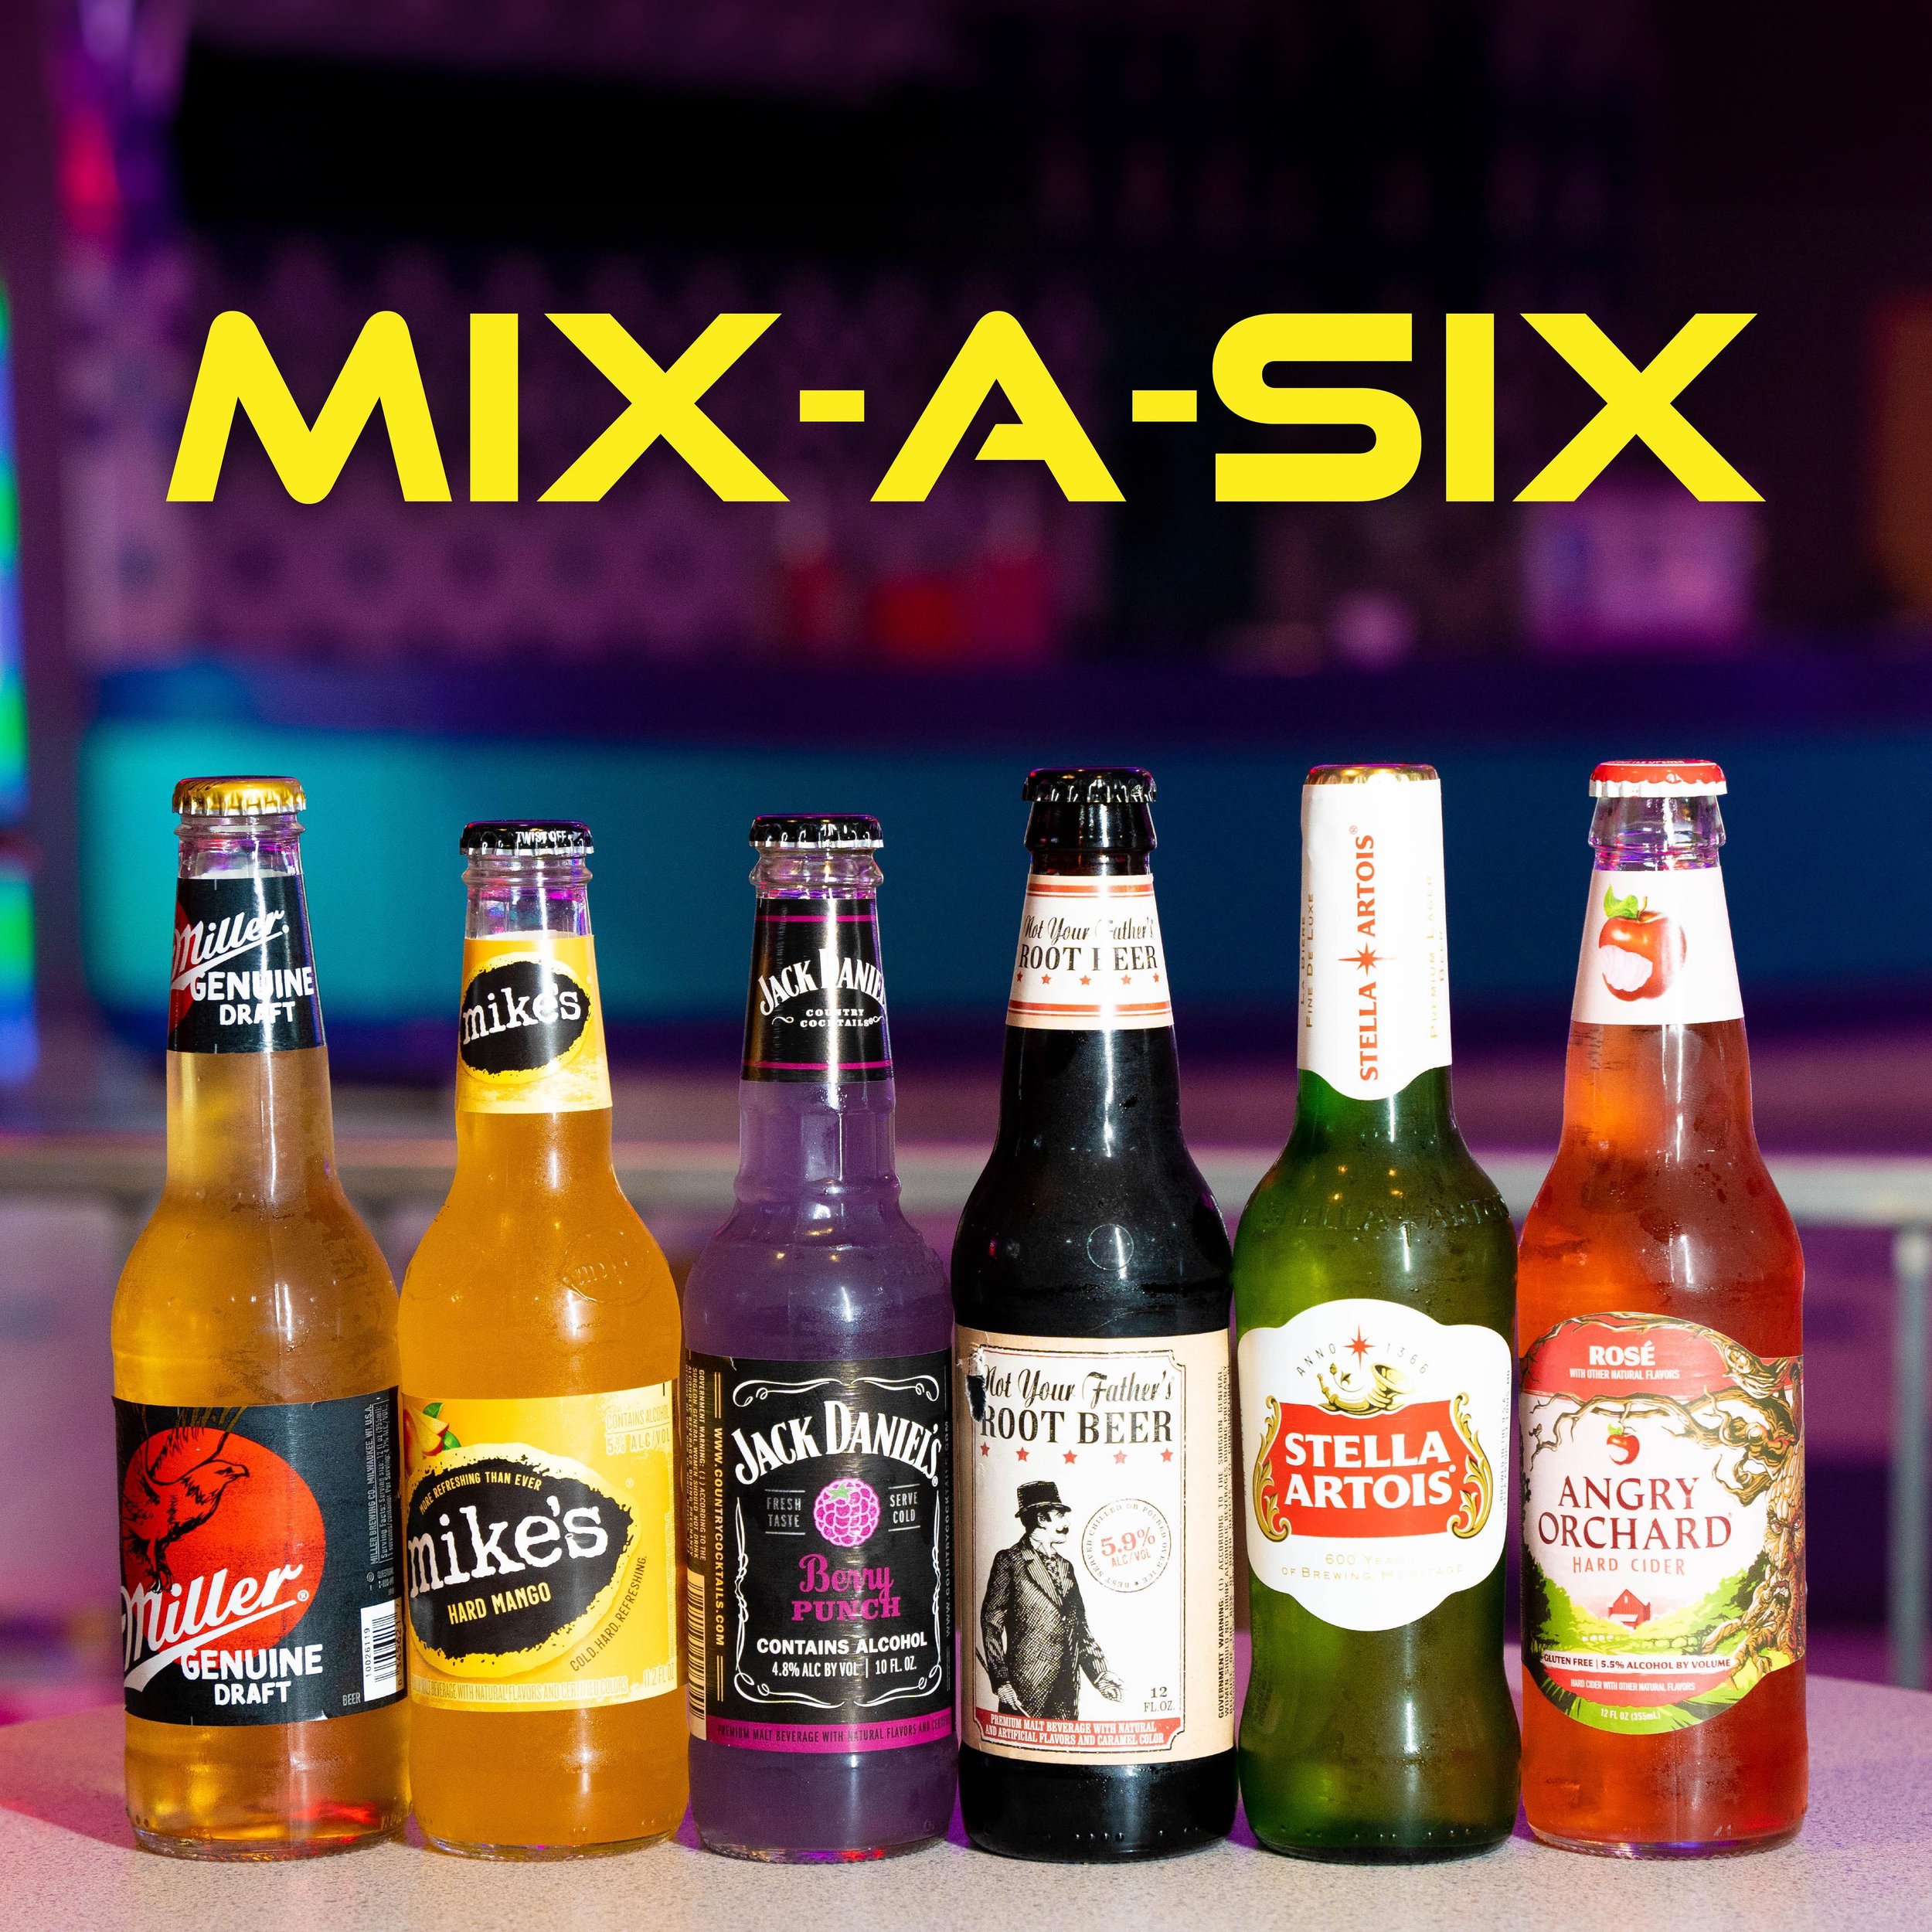 Wanna grab a 6 pack? Now you can! Choose from our wide variety of beers and MIX-A-SIX for just $15. It&rsquo;s a perfect excuse to grab some pizza and popcorn for your own little party. Our theater-made fresh caramel corn would go great with your bee